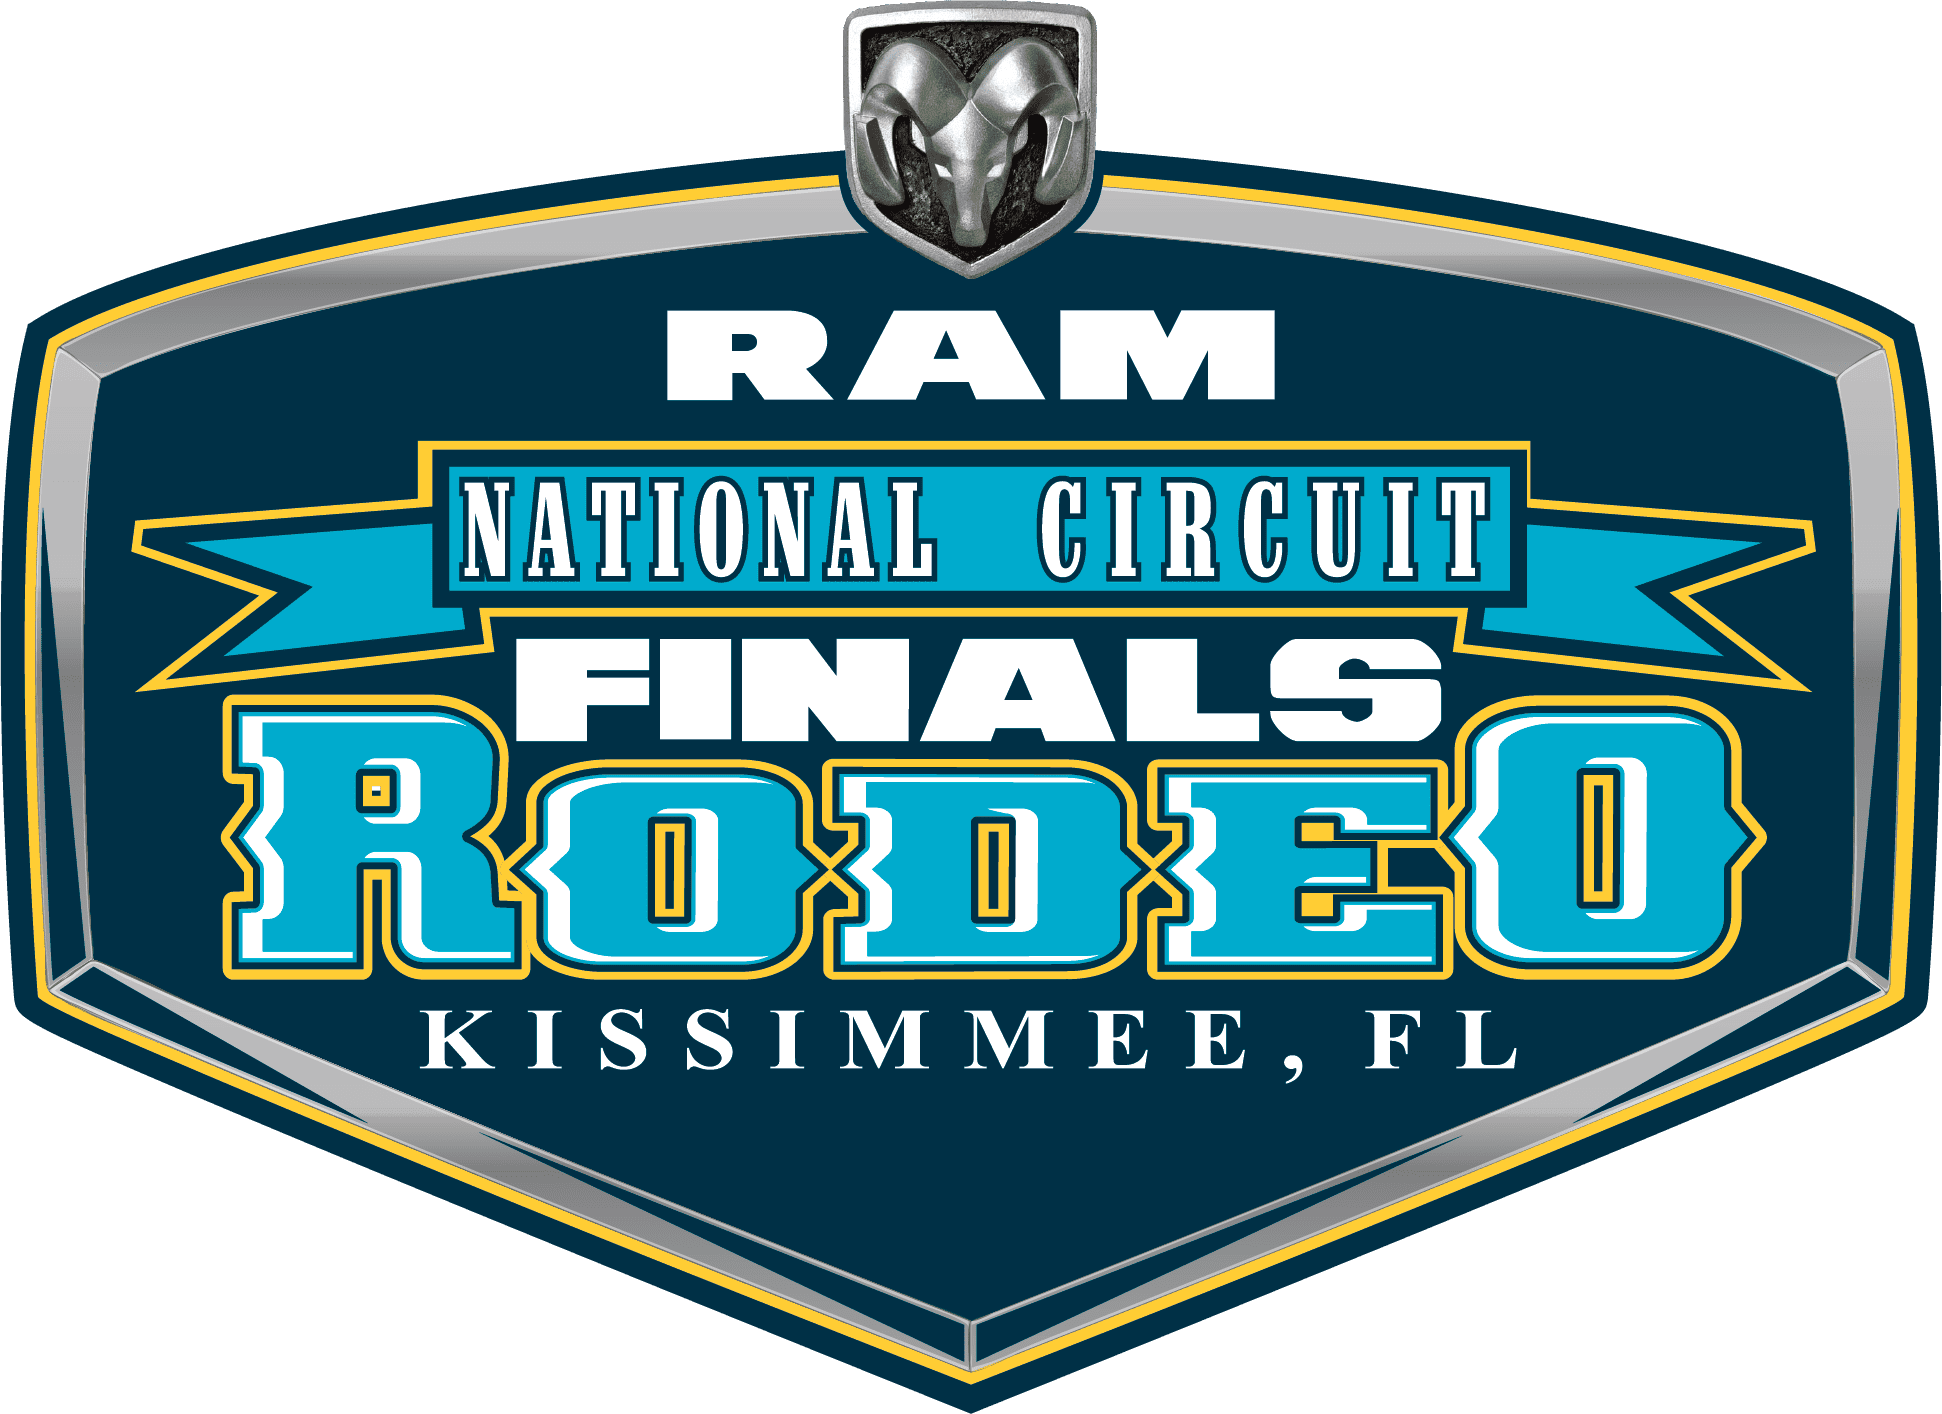 NFR Logo - RAM National Circuit Finals Rodeo | Rodeo in Kissimmee